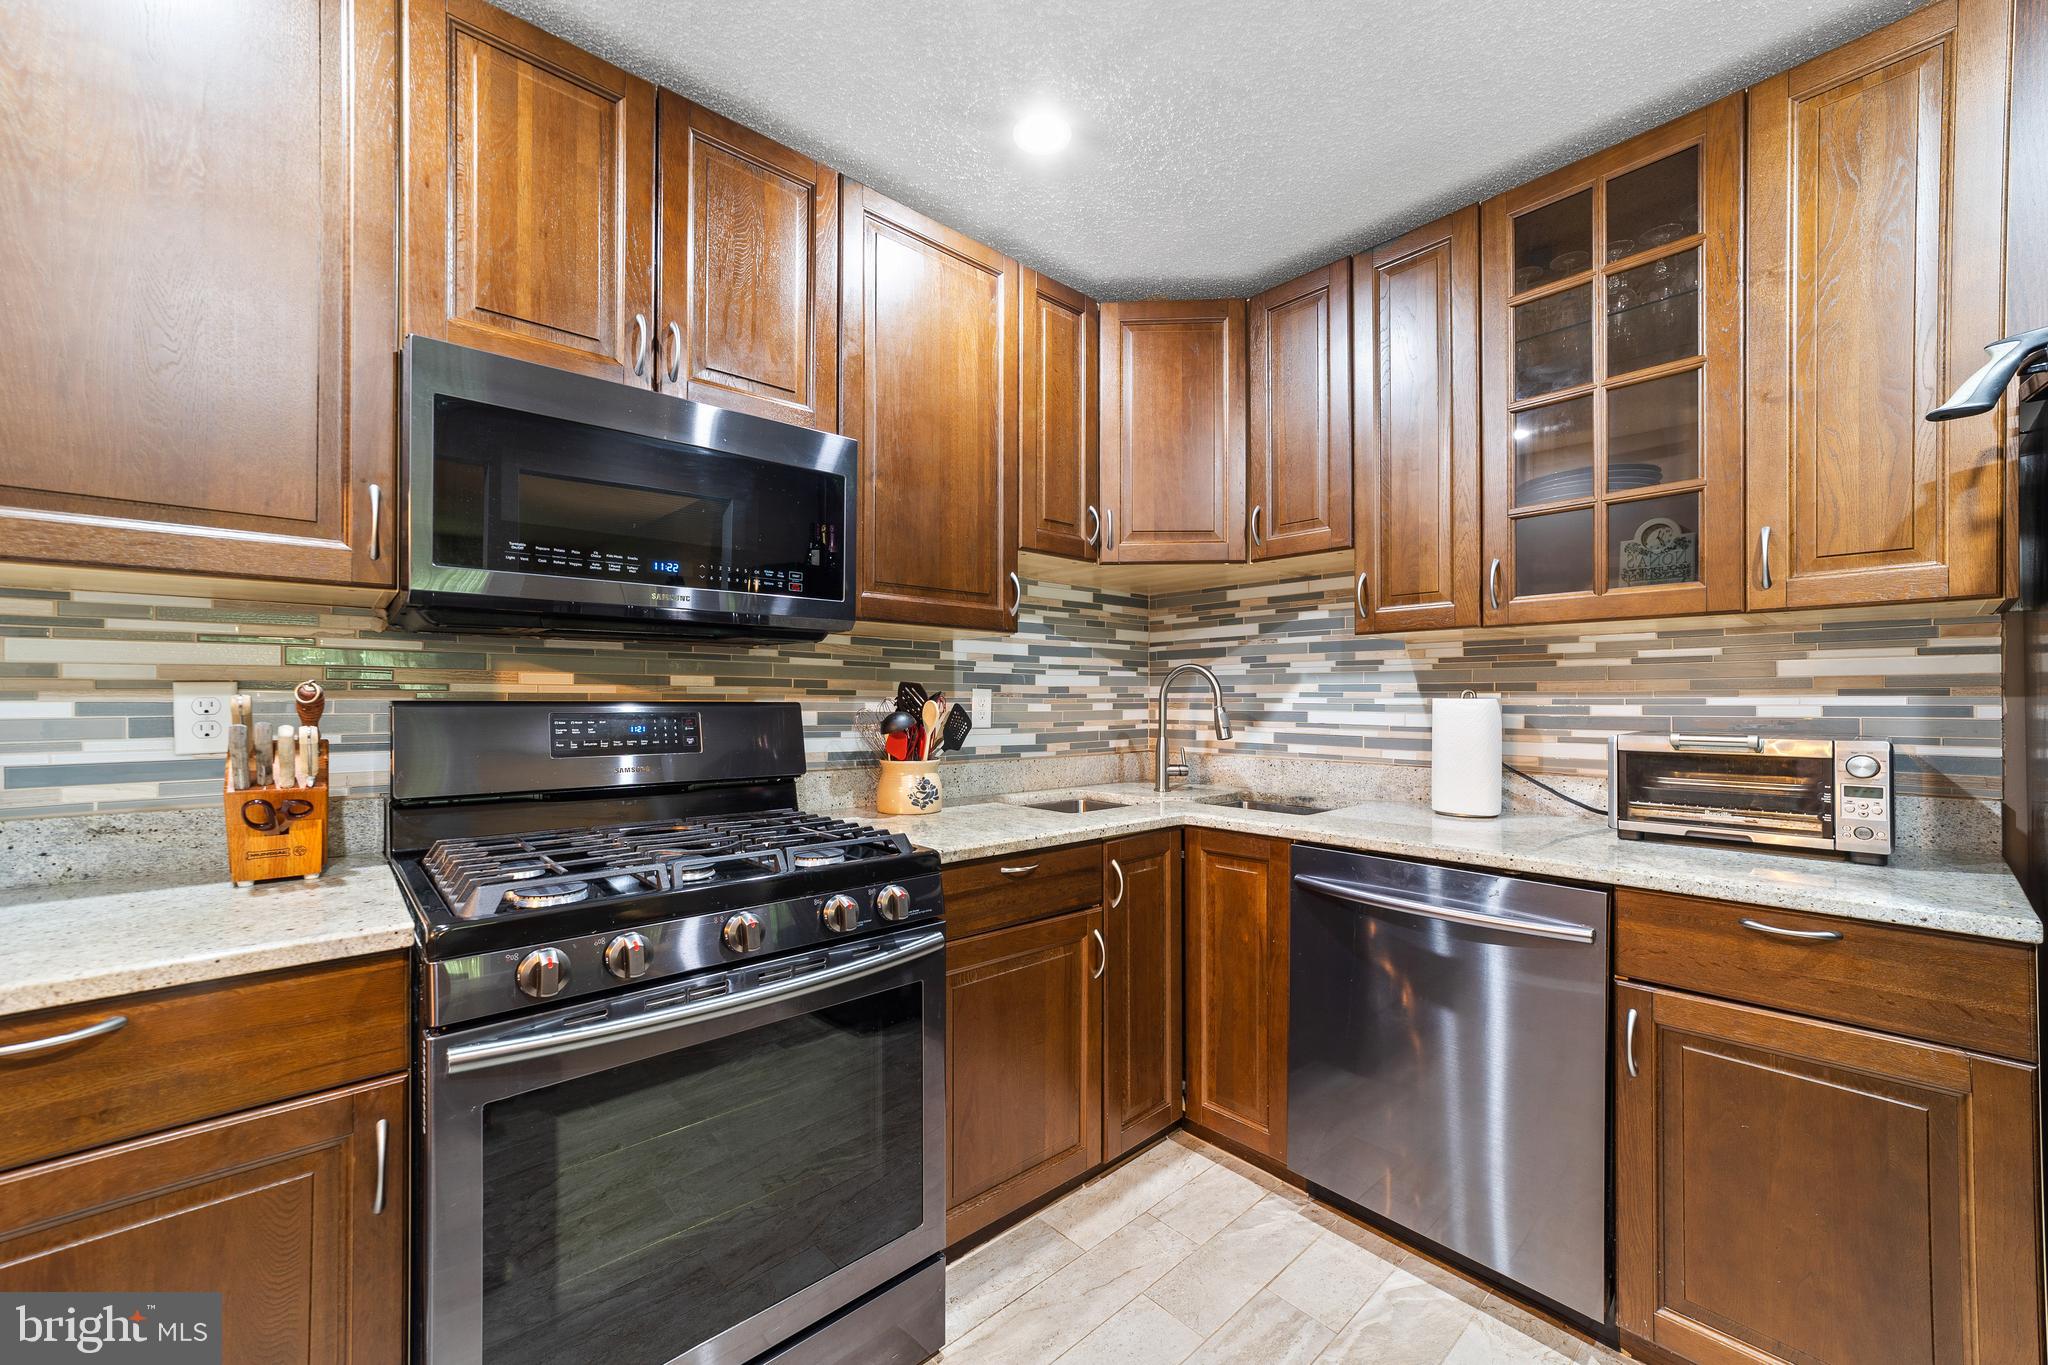 a kitchen with granite countertop wooden cabinets stainless steel appliances and a window